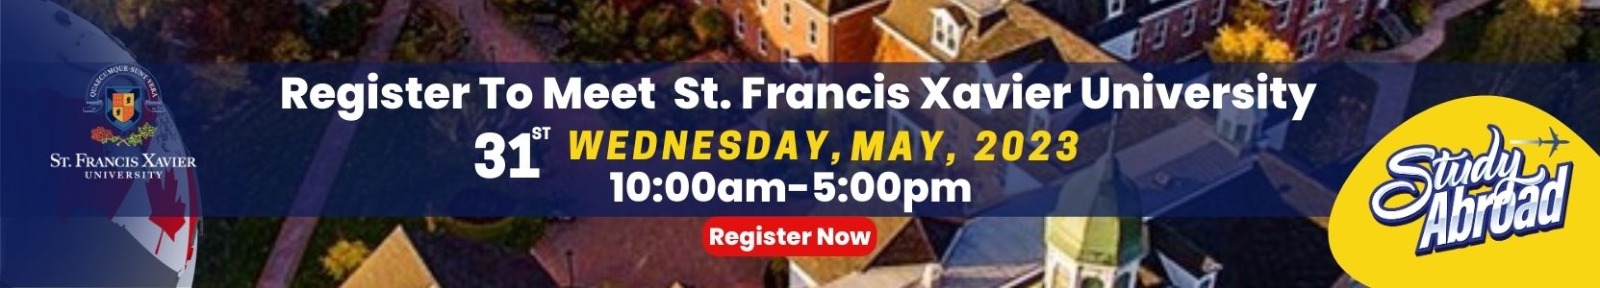 LEARN ABOUT ST. FRANCIS XAVIER UNIVERSITY: MEET OUR REPRESENTATIVE AT EDUCARE INTERNATIONAL